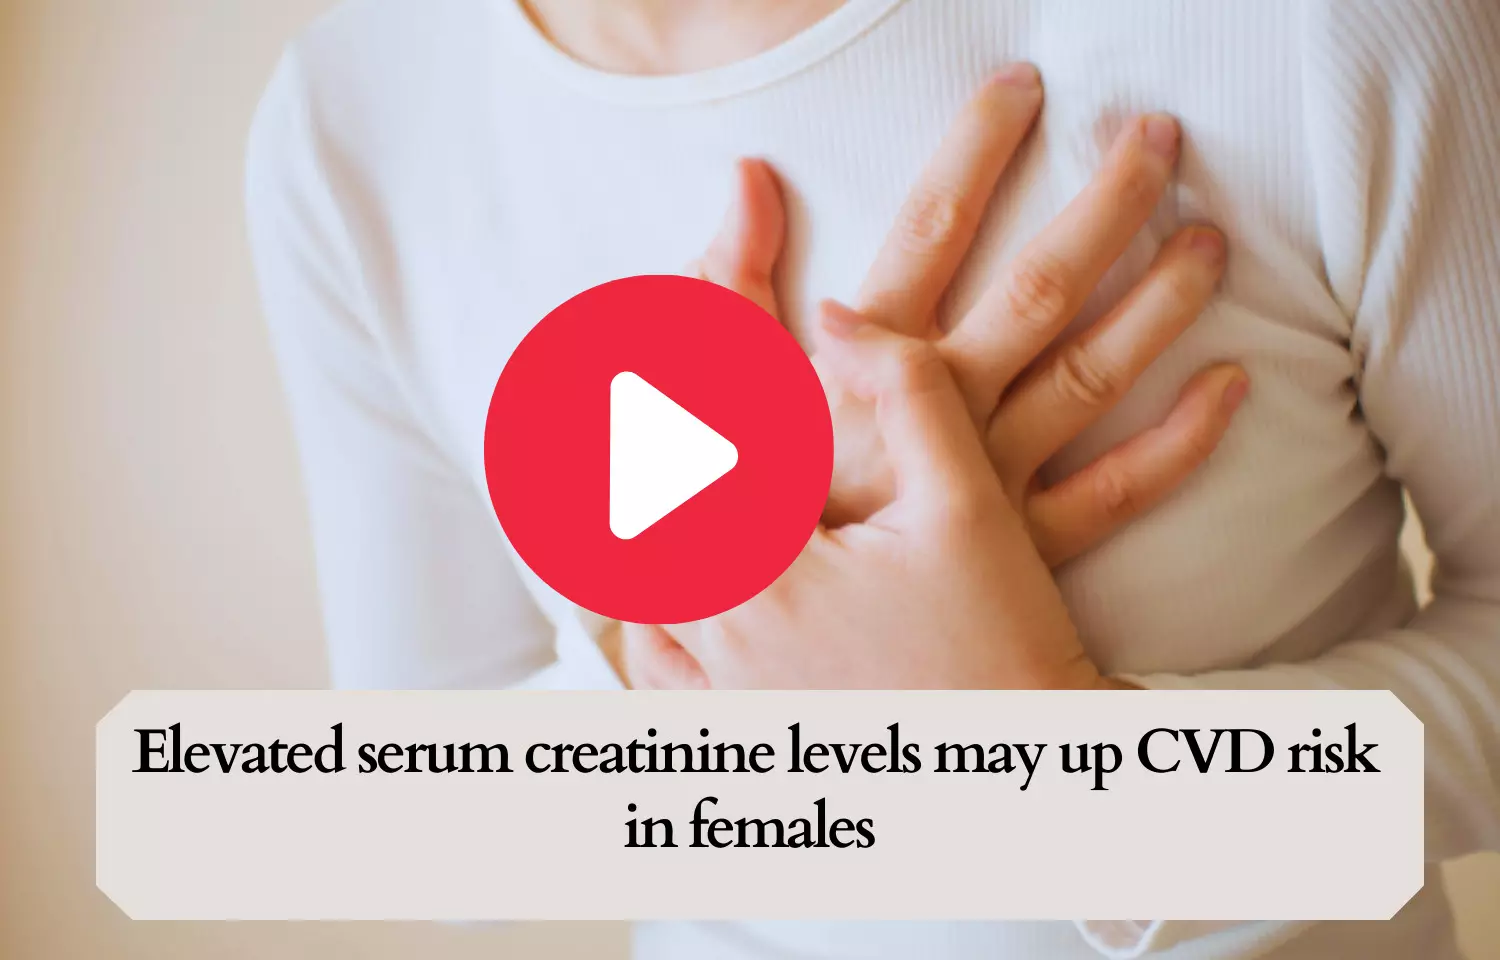 Journal Club - Elevated serum creatinine levels may up CVD risk in females